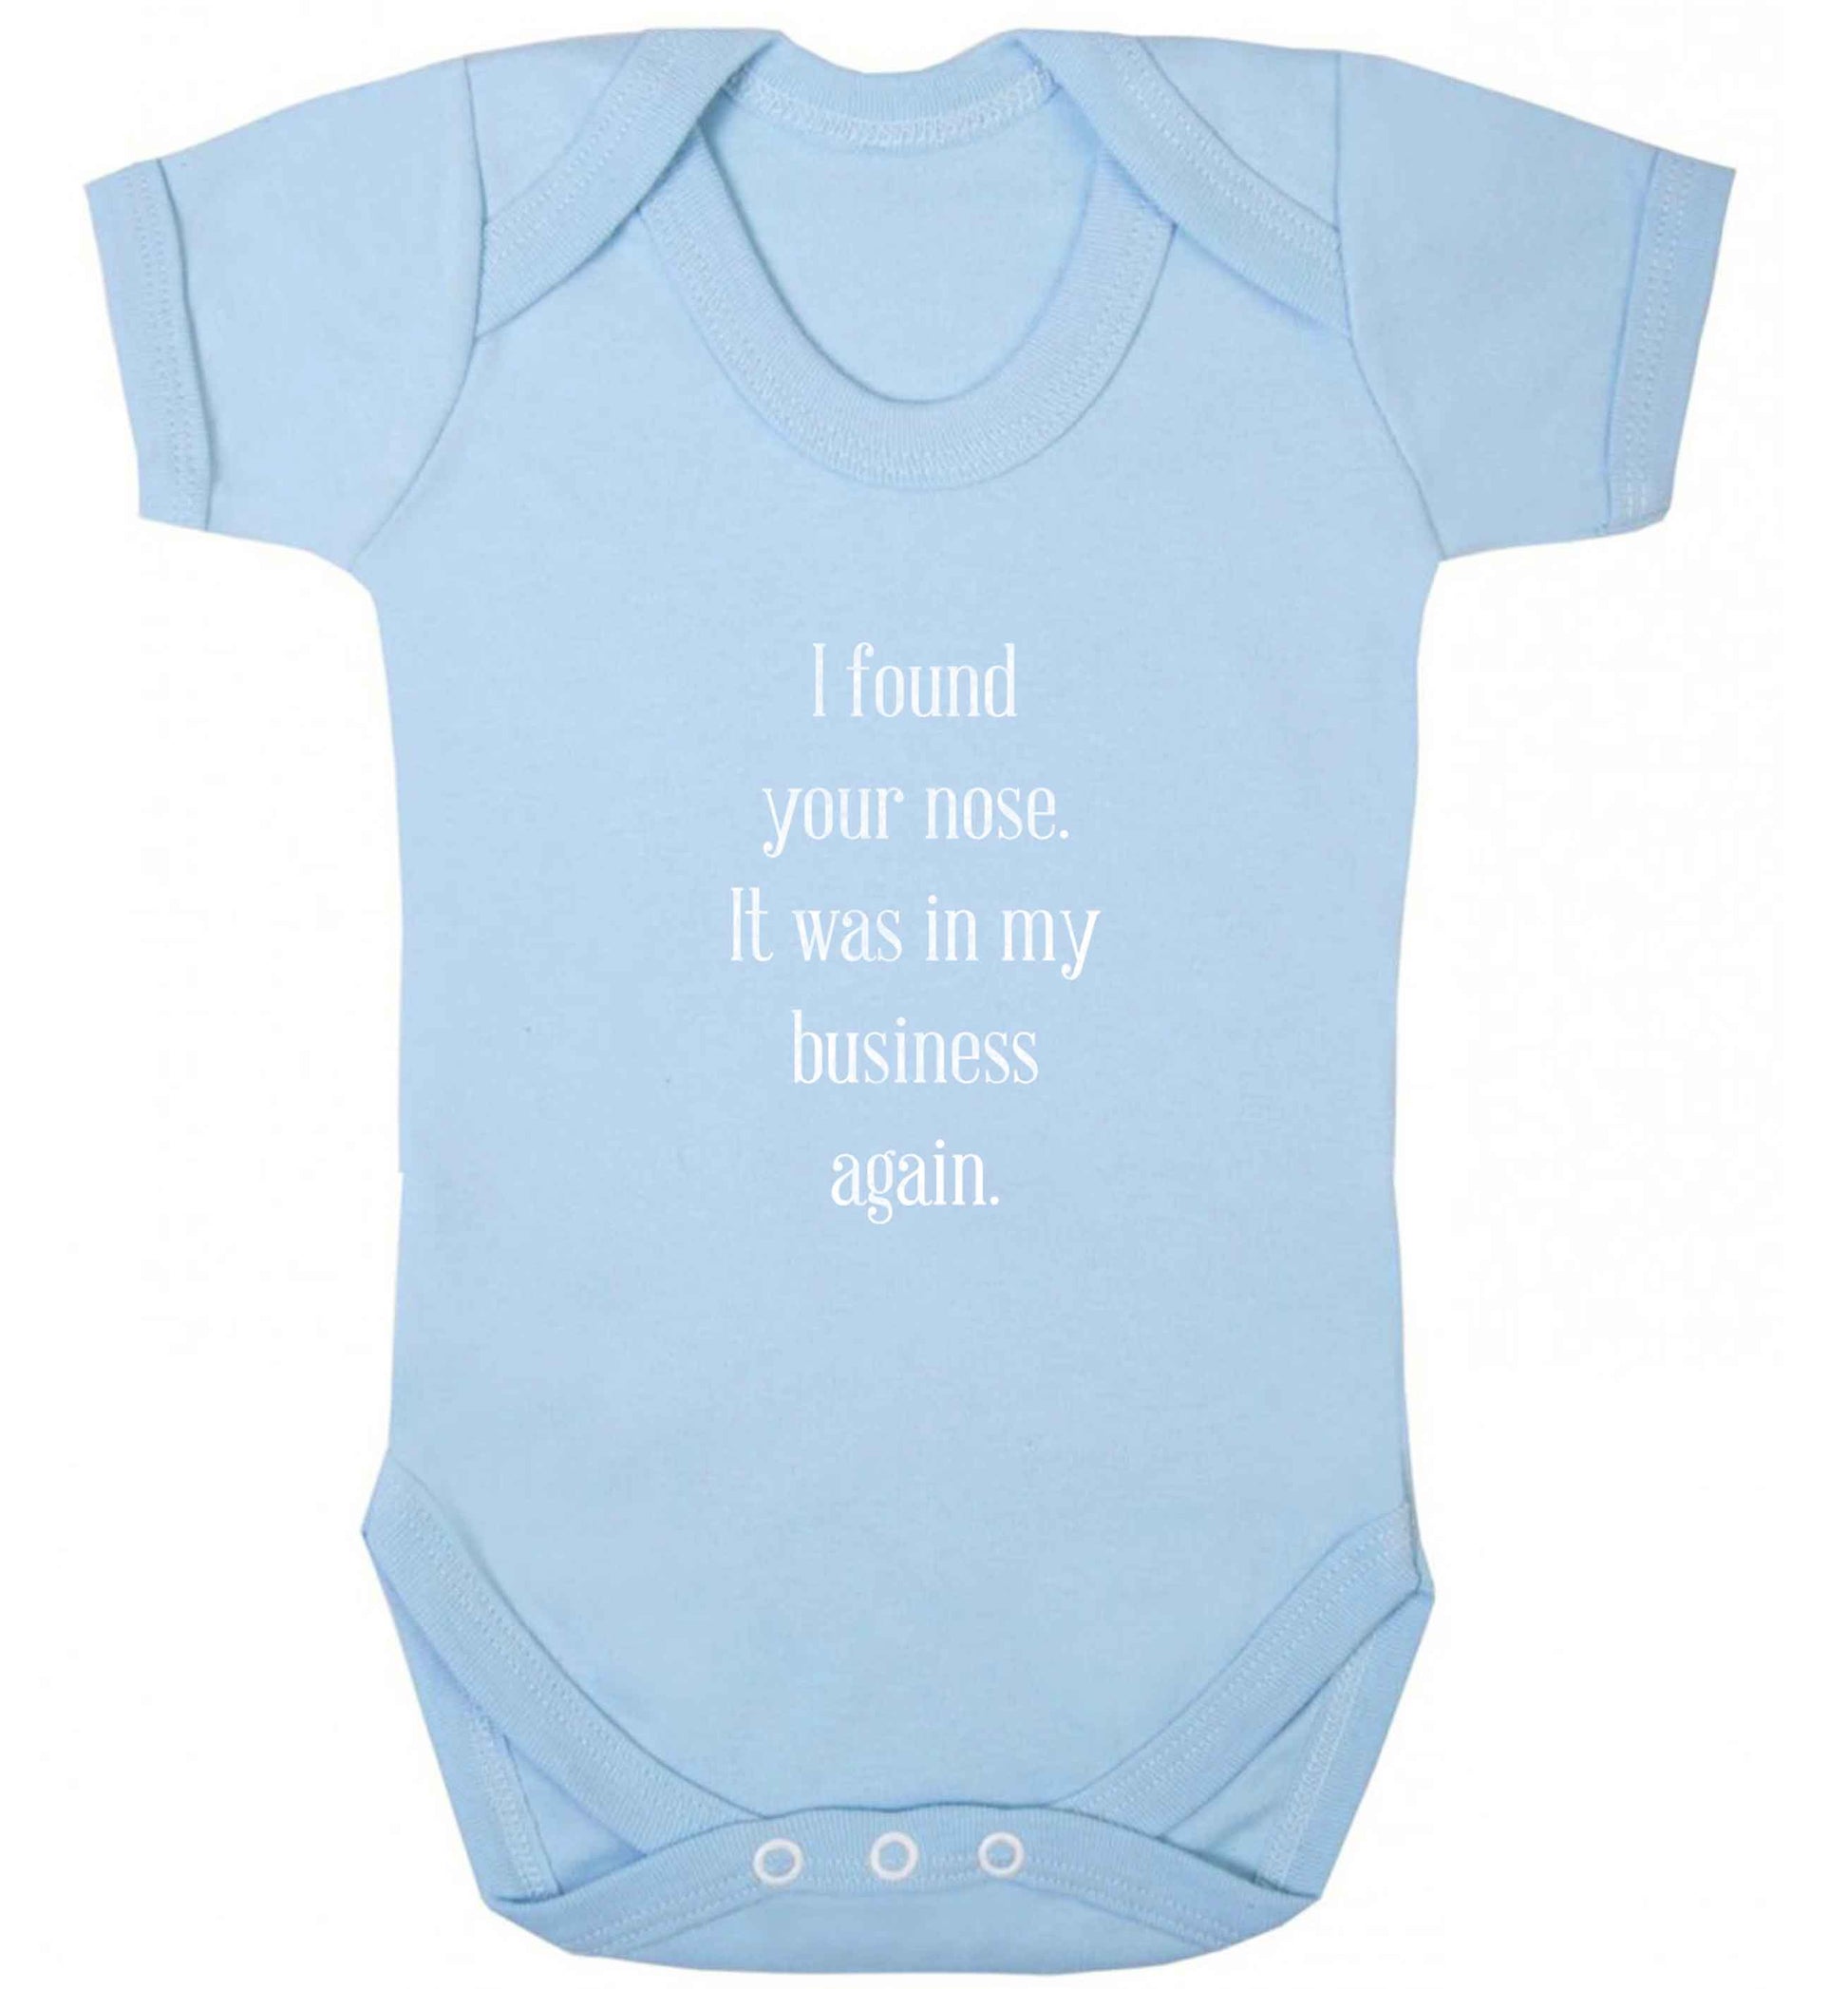 I found your nose it was in my business again baby vest pale blue 18-24 months